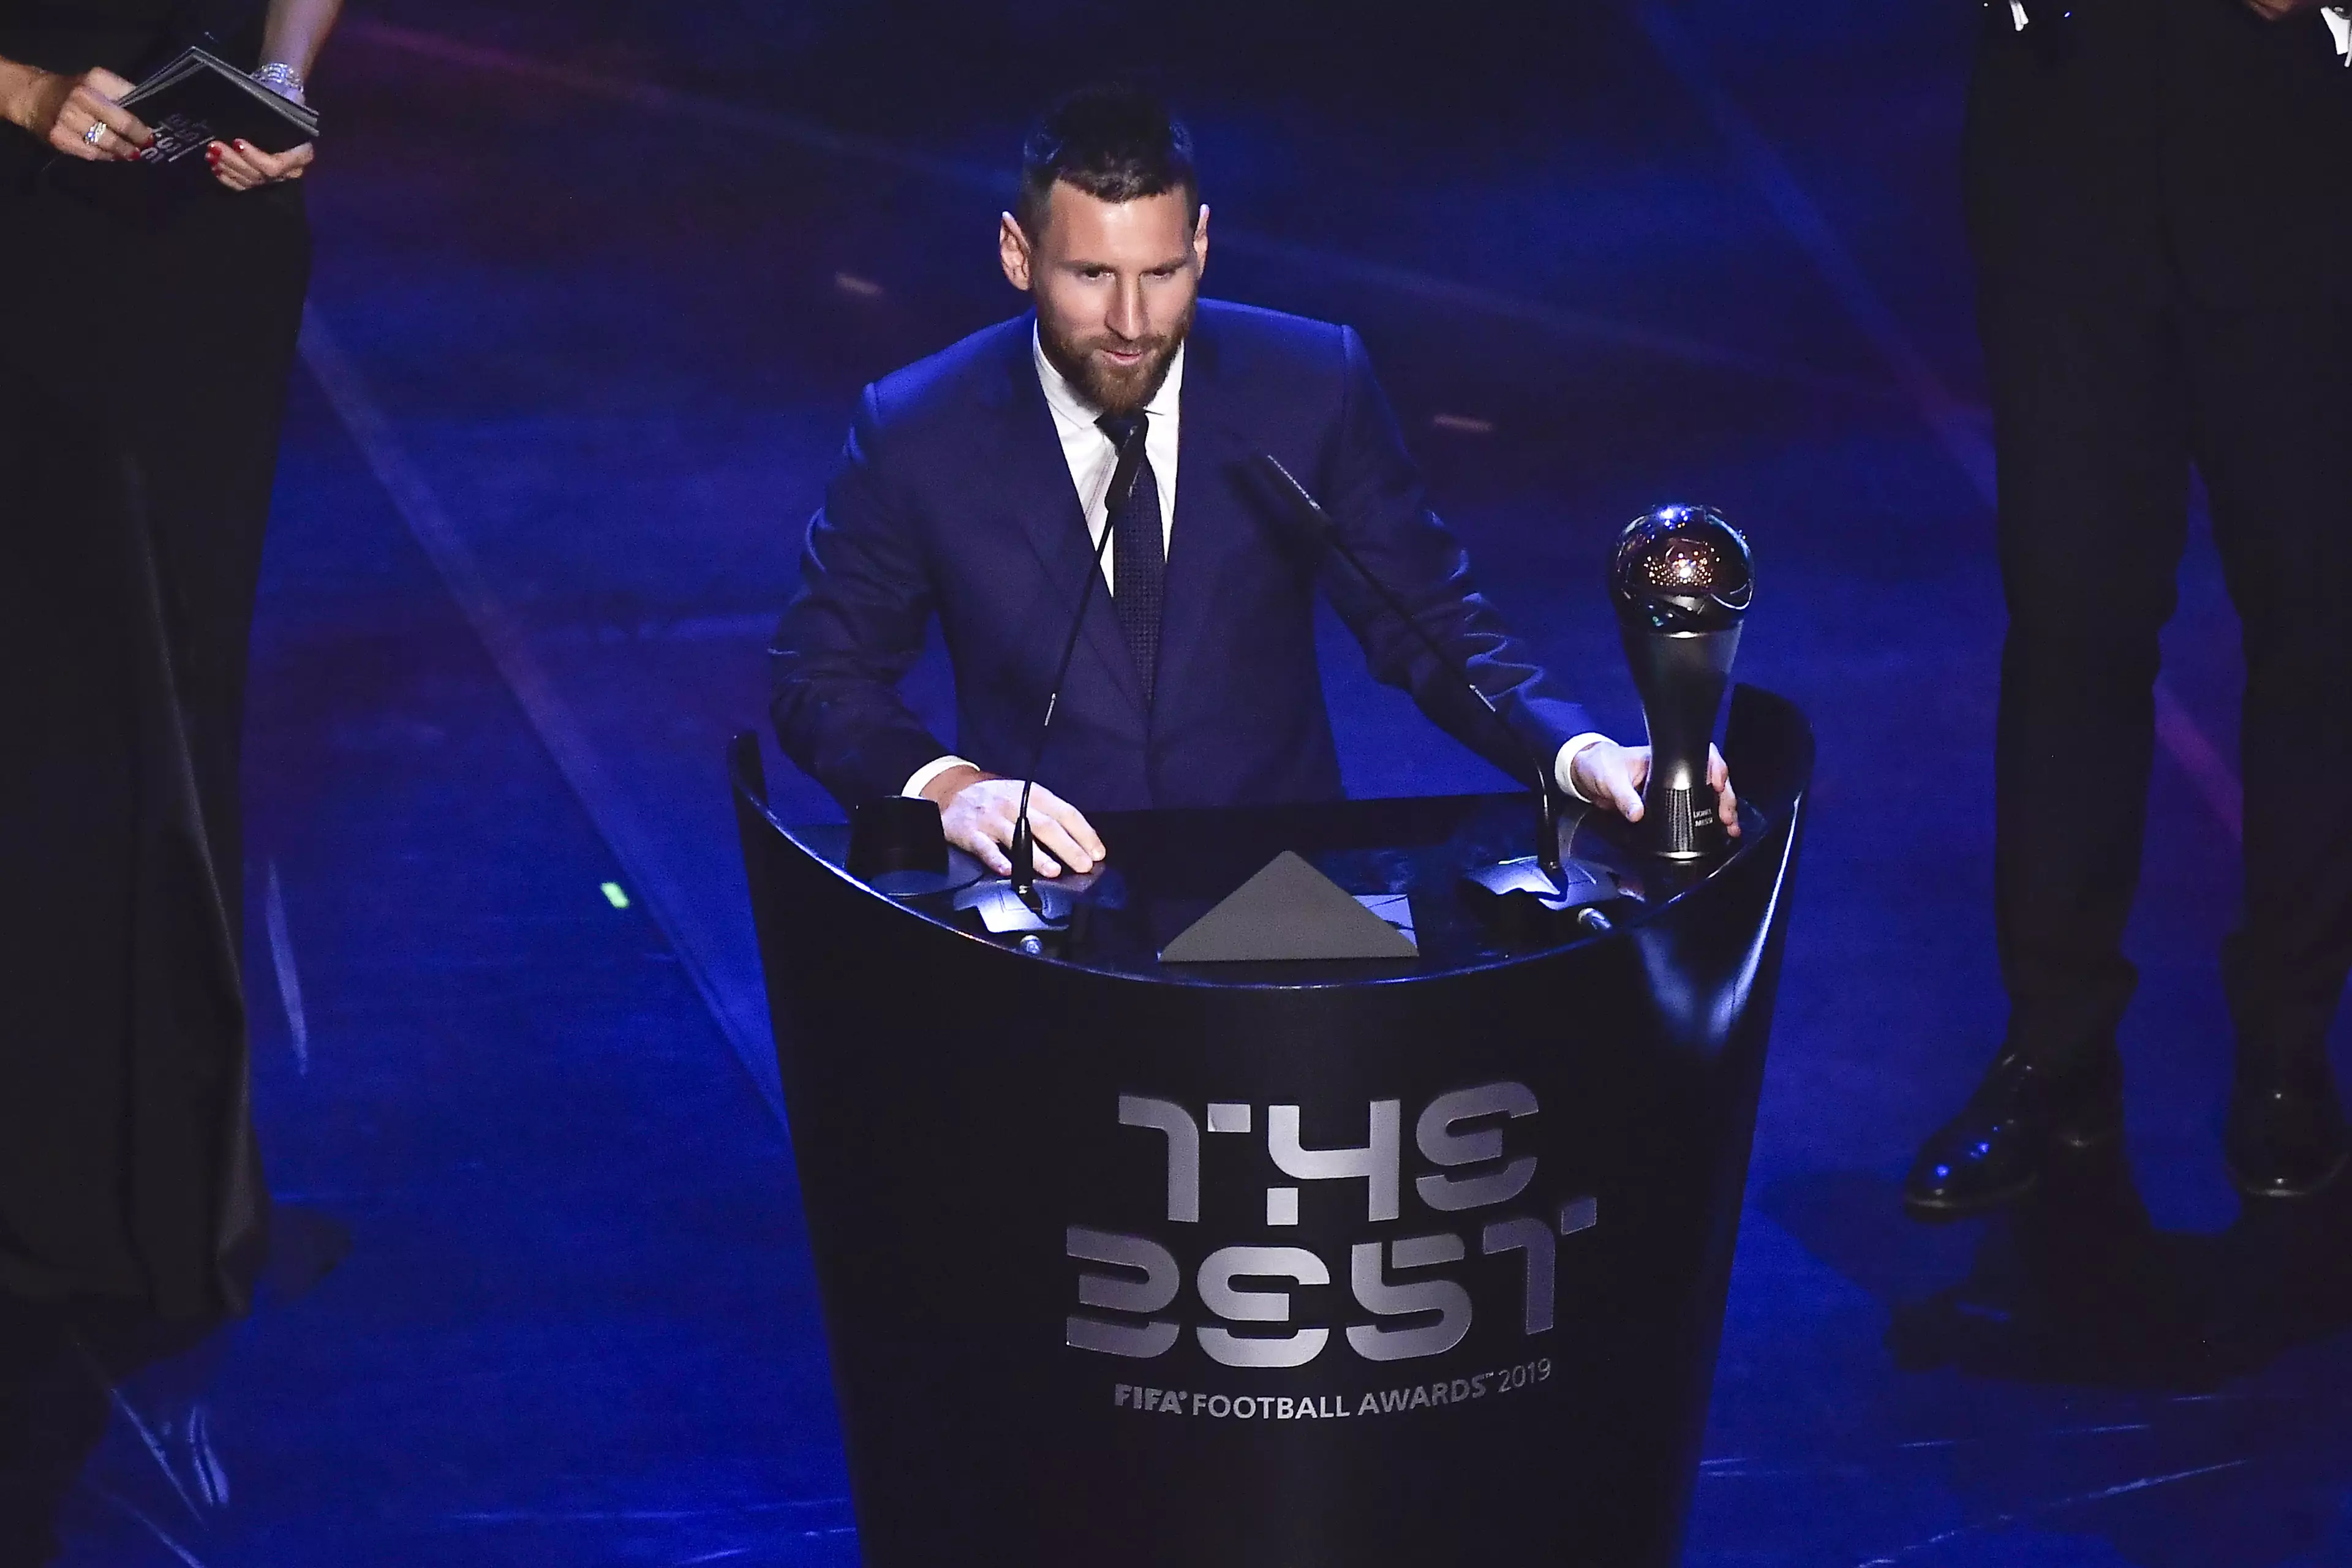 Messi with his award. Image: PA Images